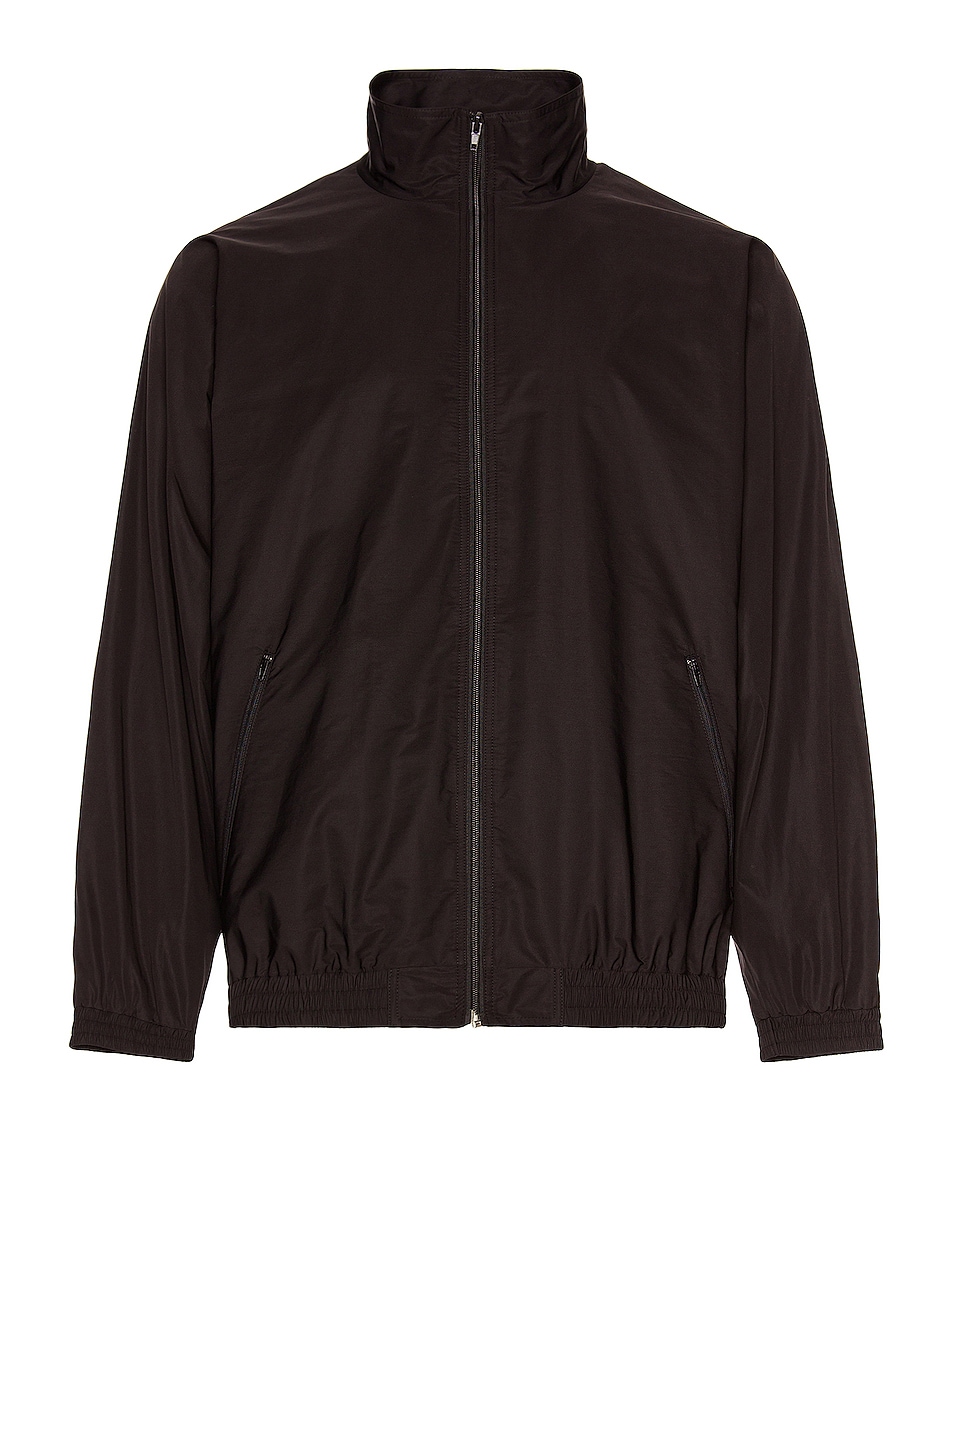 Image 1 of The Row Nantuck Jacket in Black